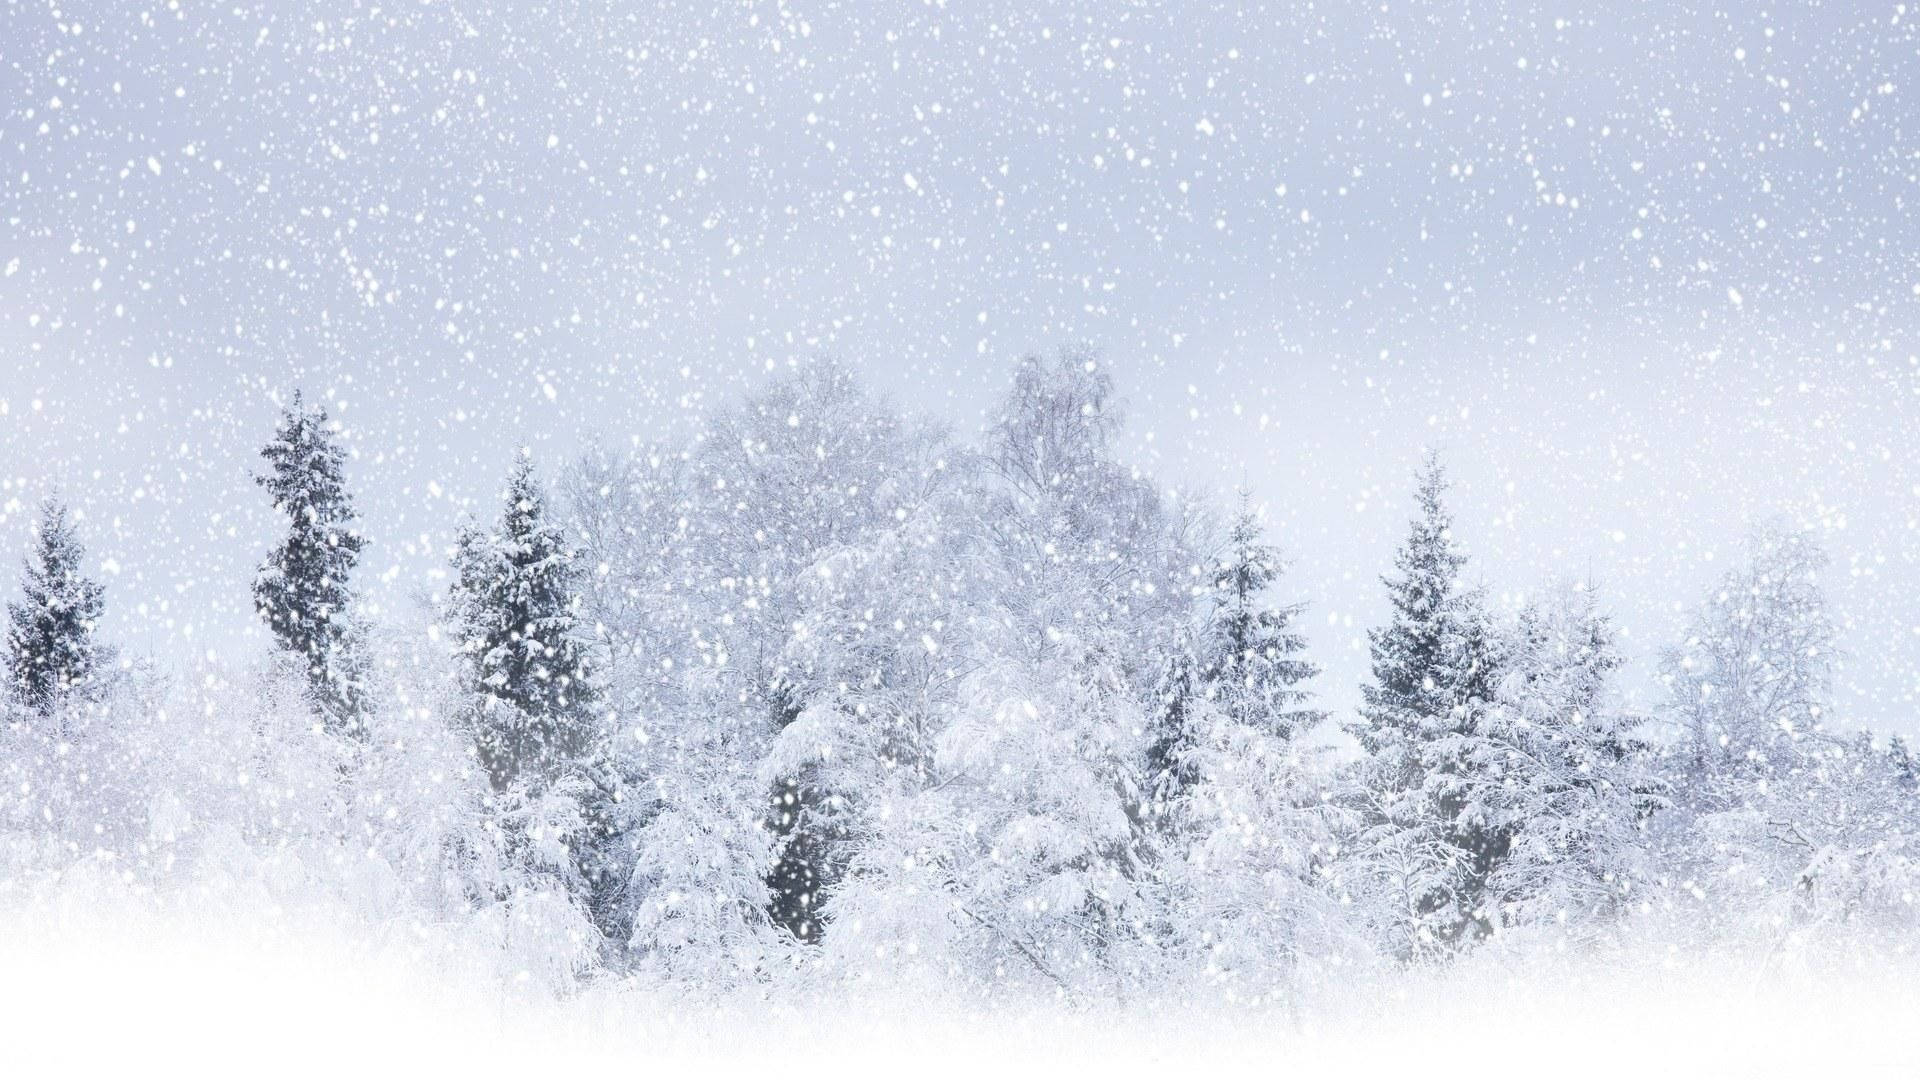 "Experience the beauty of winter with Snow Desktop." Wallpaper